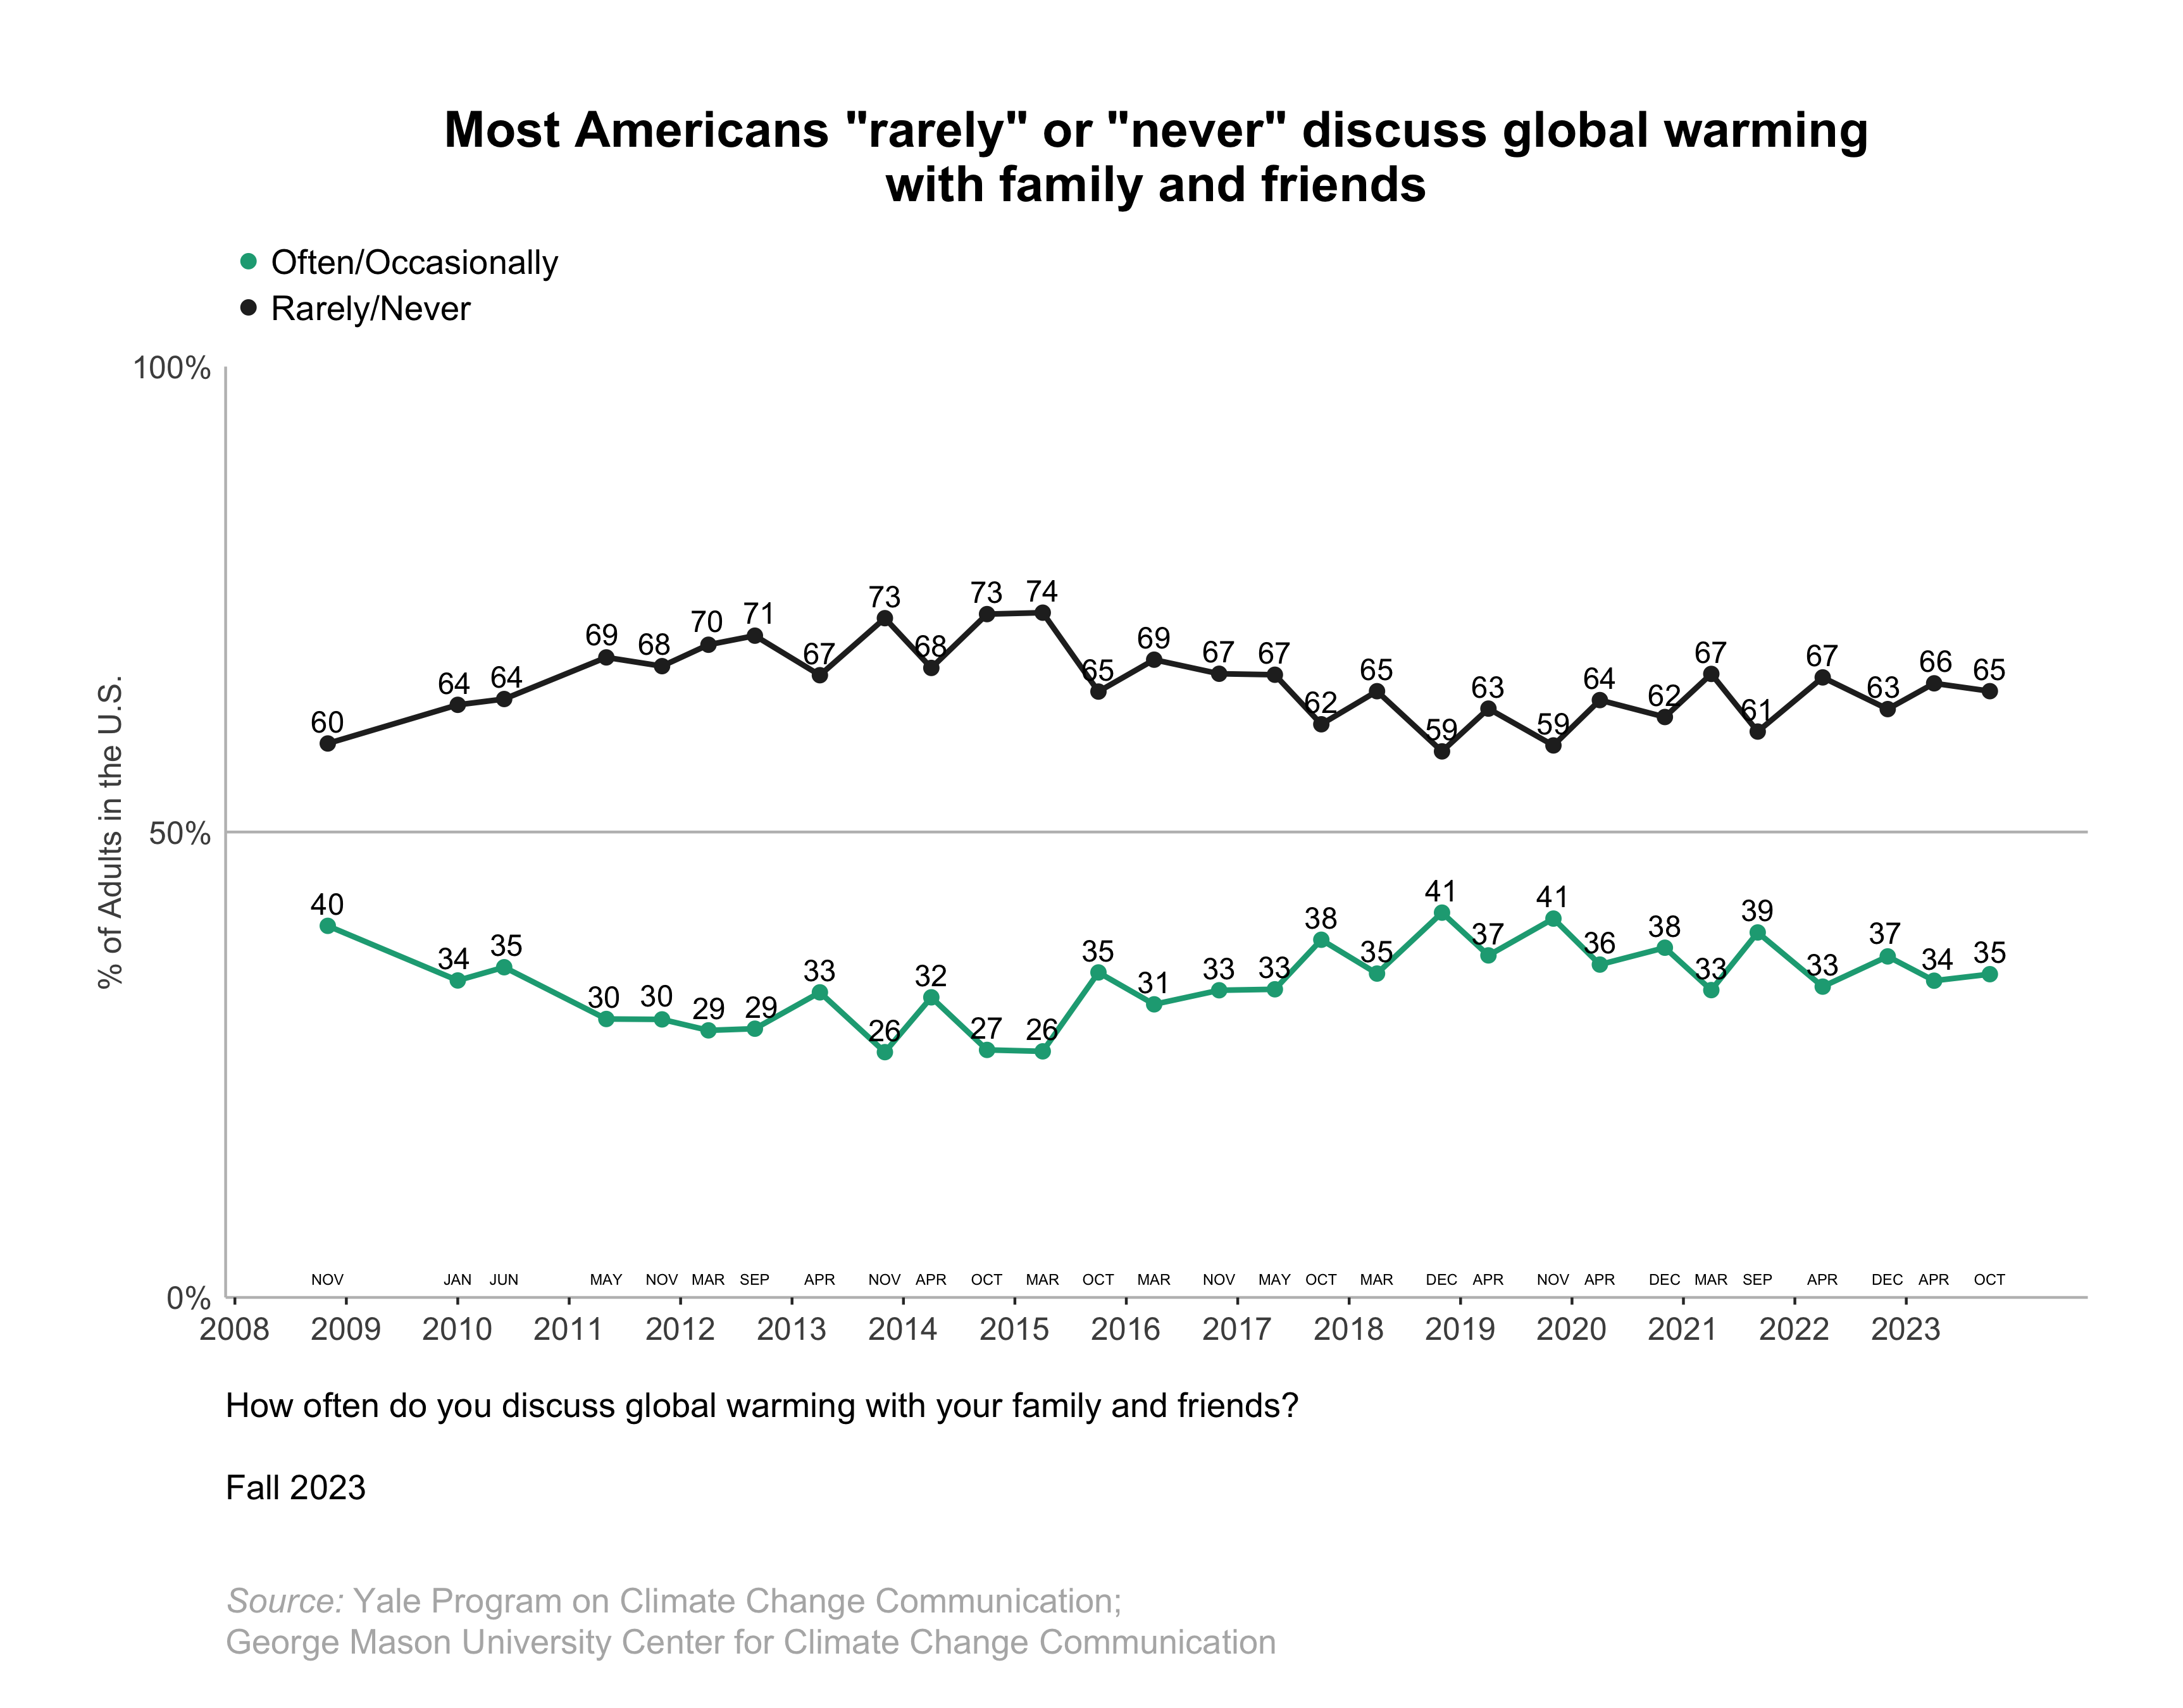 This line graph shows the percentage of Americans over time since 2008 who "often" or "occasionally" versus "rarely" or "never" discuss global warming with family and friends. Most Americans "rarely" or "never" discuss global warming with family and friends. Data: Climate Change in the American Mind, Fall 2023. Refer to the data tables in Appendix 1 of the report for all percentages.